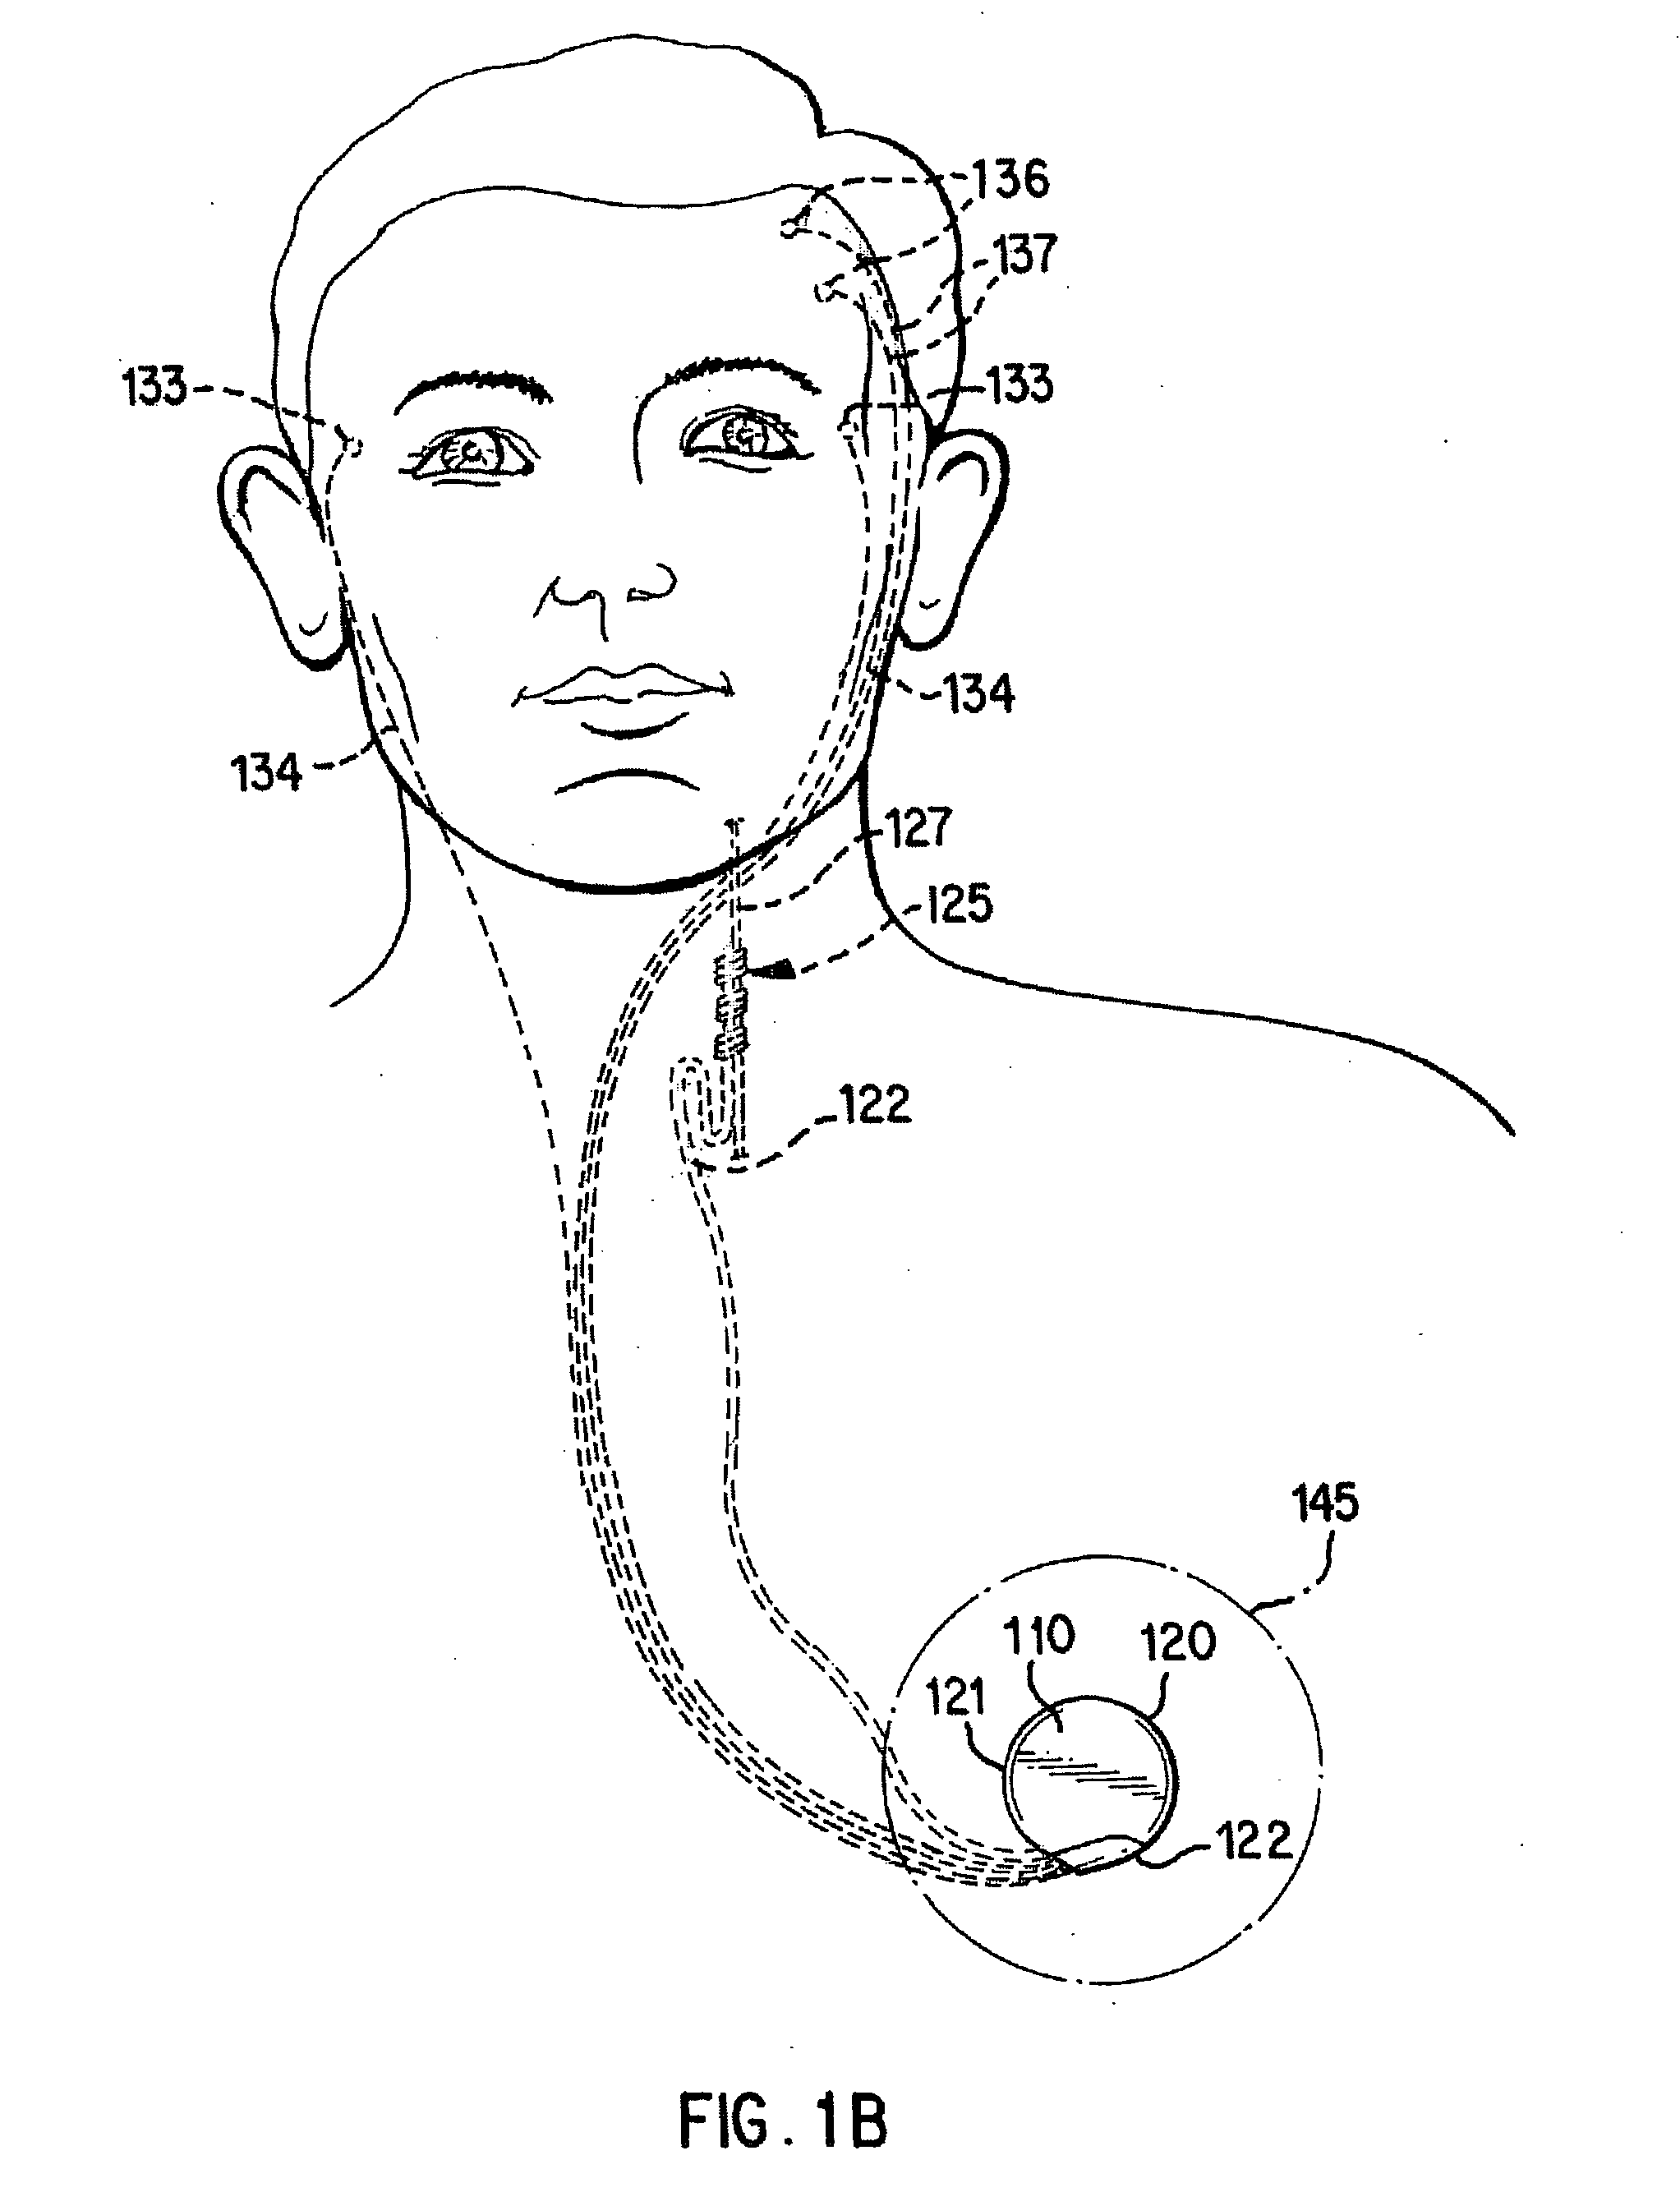 Impedance measurement for an implantable device